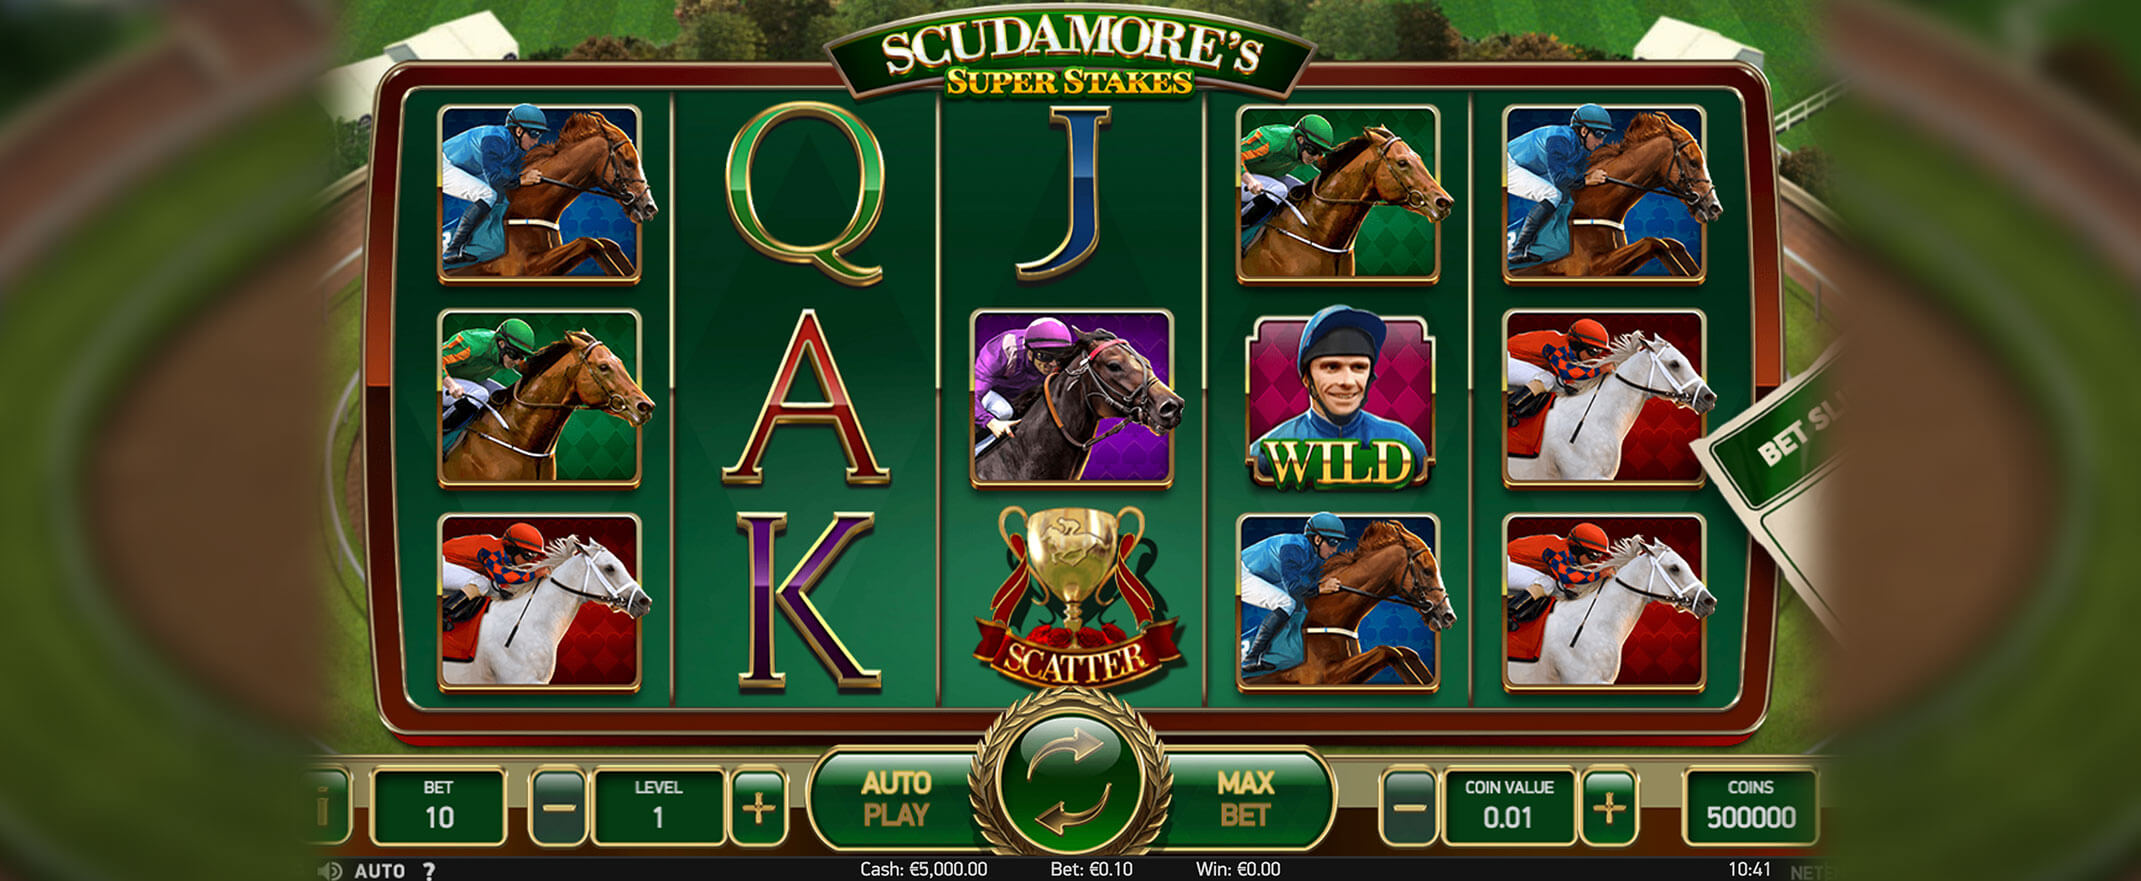 Scudamore's Super Stakes video slot from NetEnt